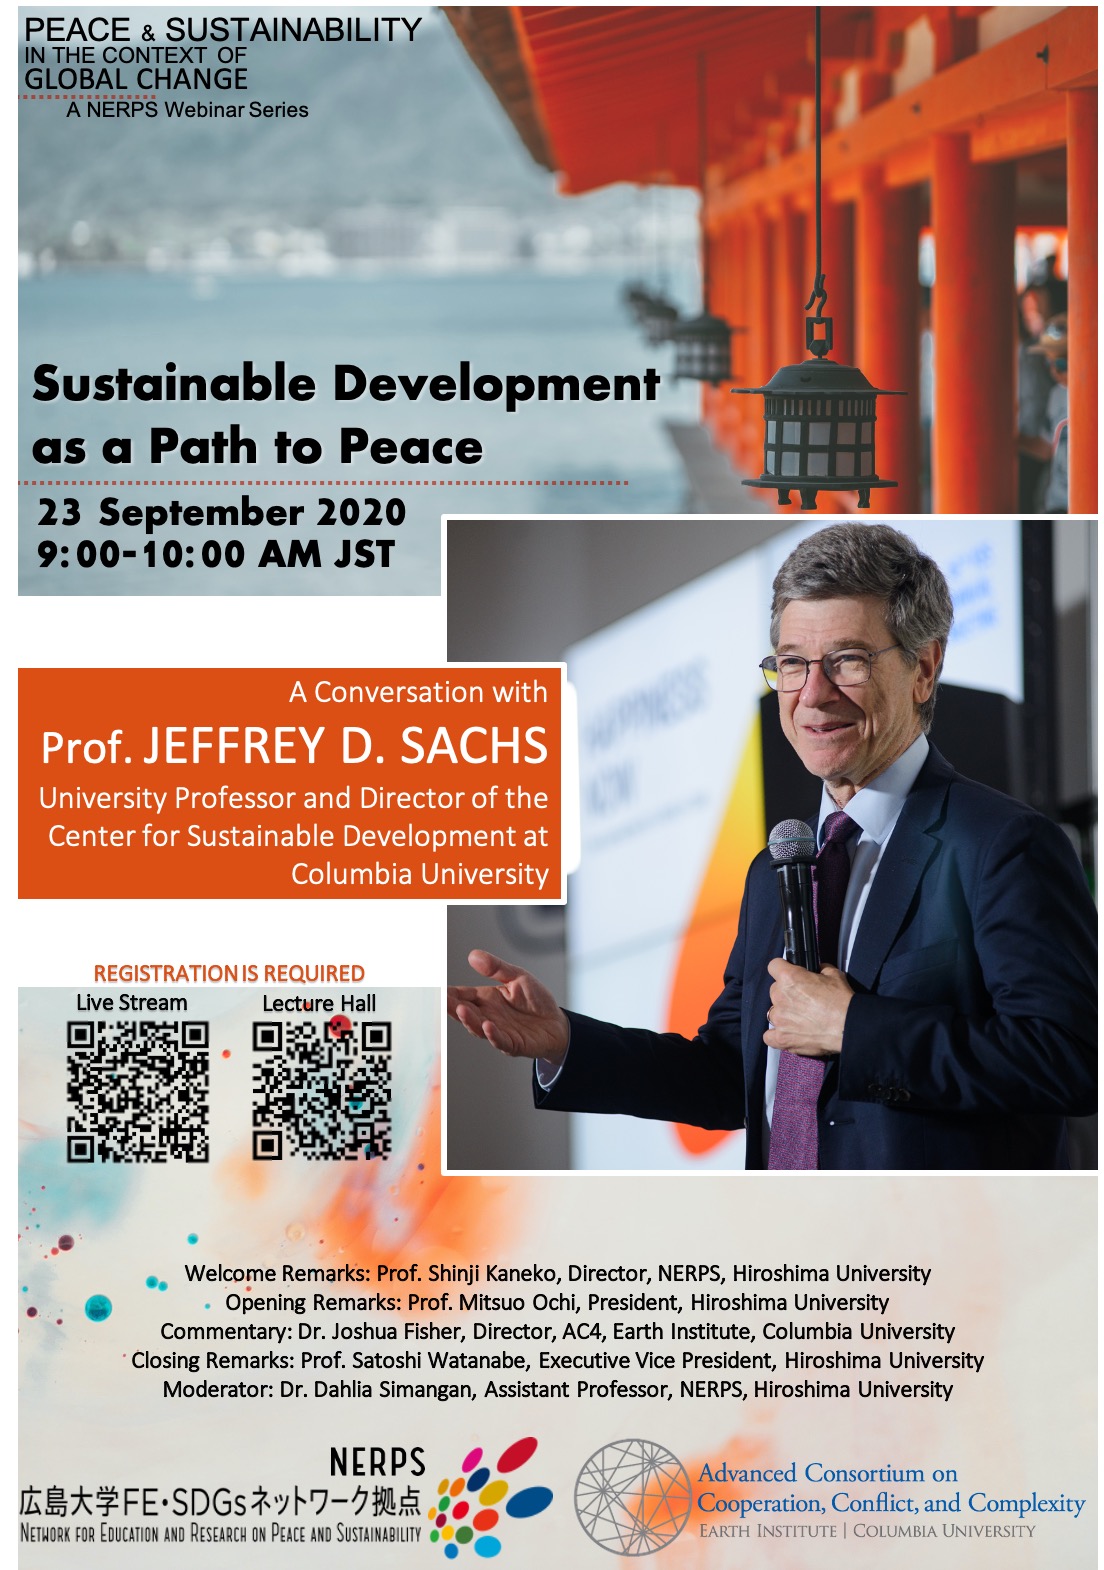 9 23 Nerps ウェビナー Sustainable Development As A Path To Peace A Conversation With Prof Jeffrey D Sachs Taoyaka Program